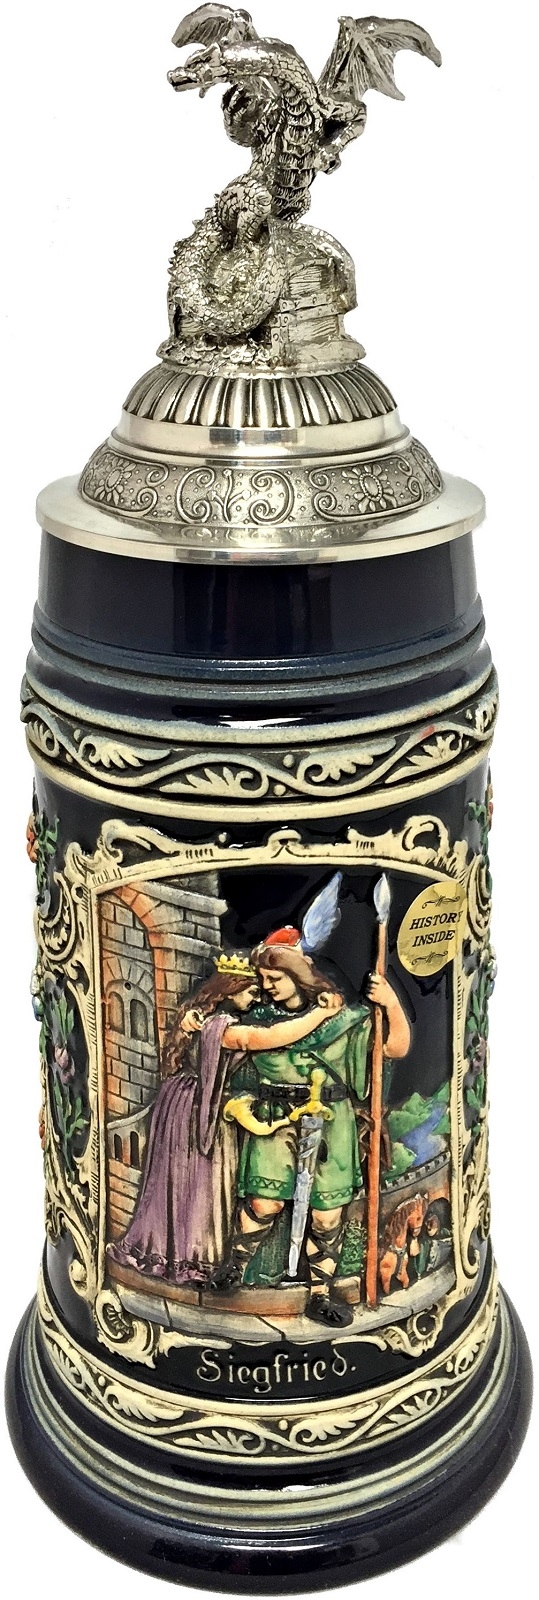 Siegfrieds Departure with 3D Dragon Pewter Lid LE German Beer Stein .75 L